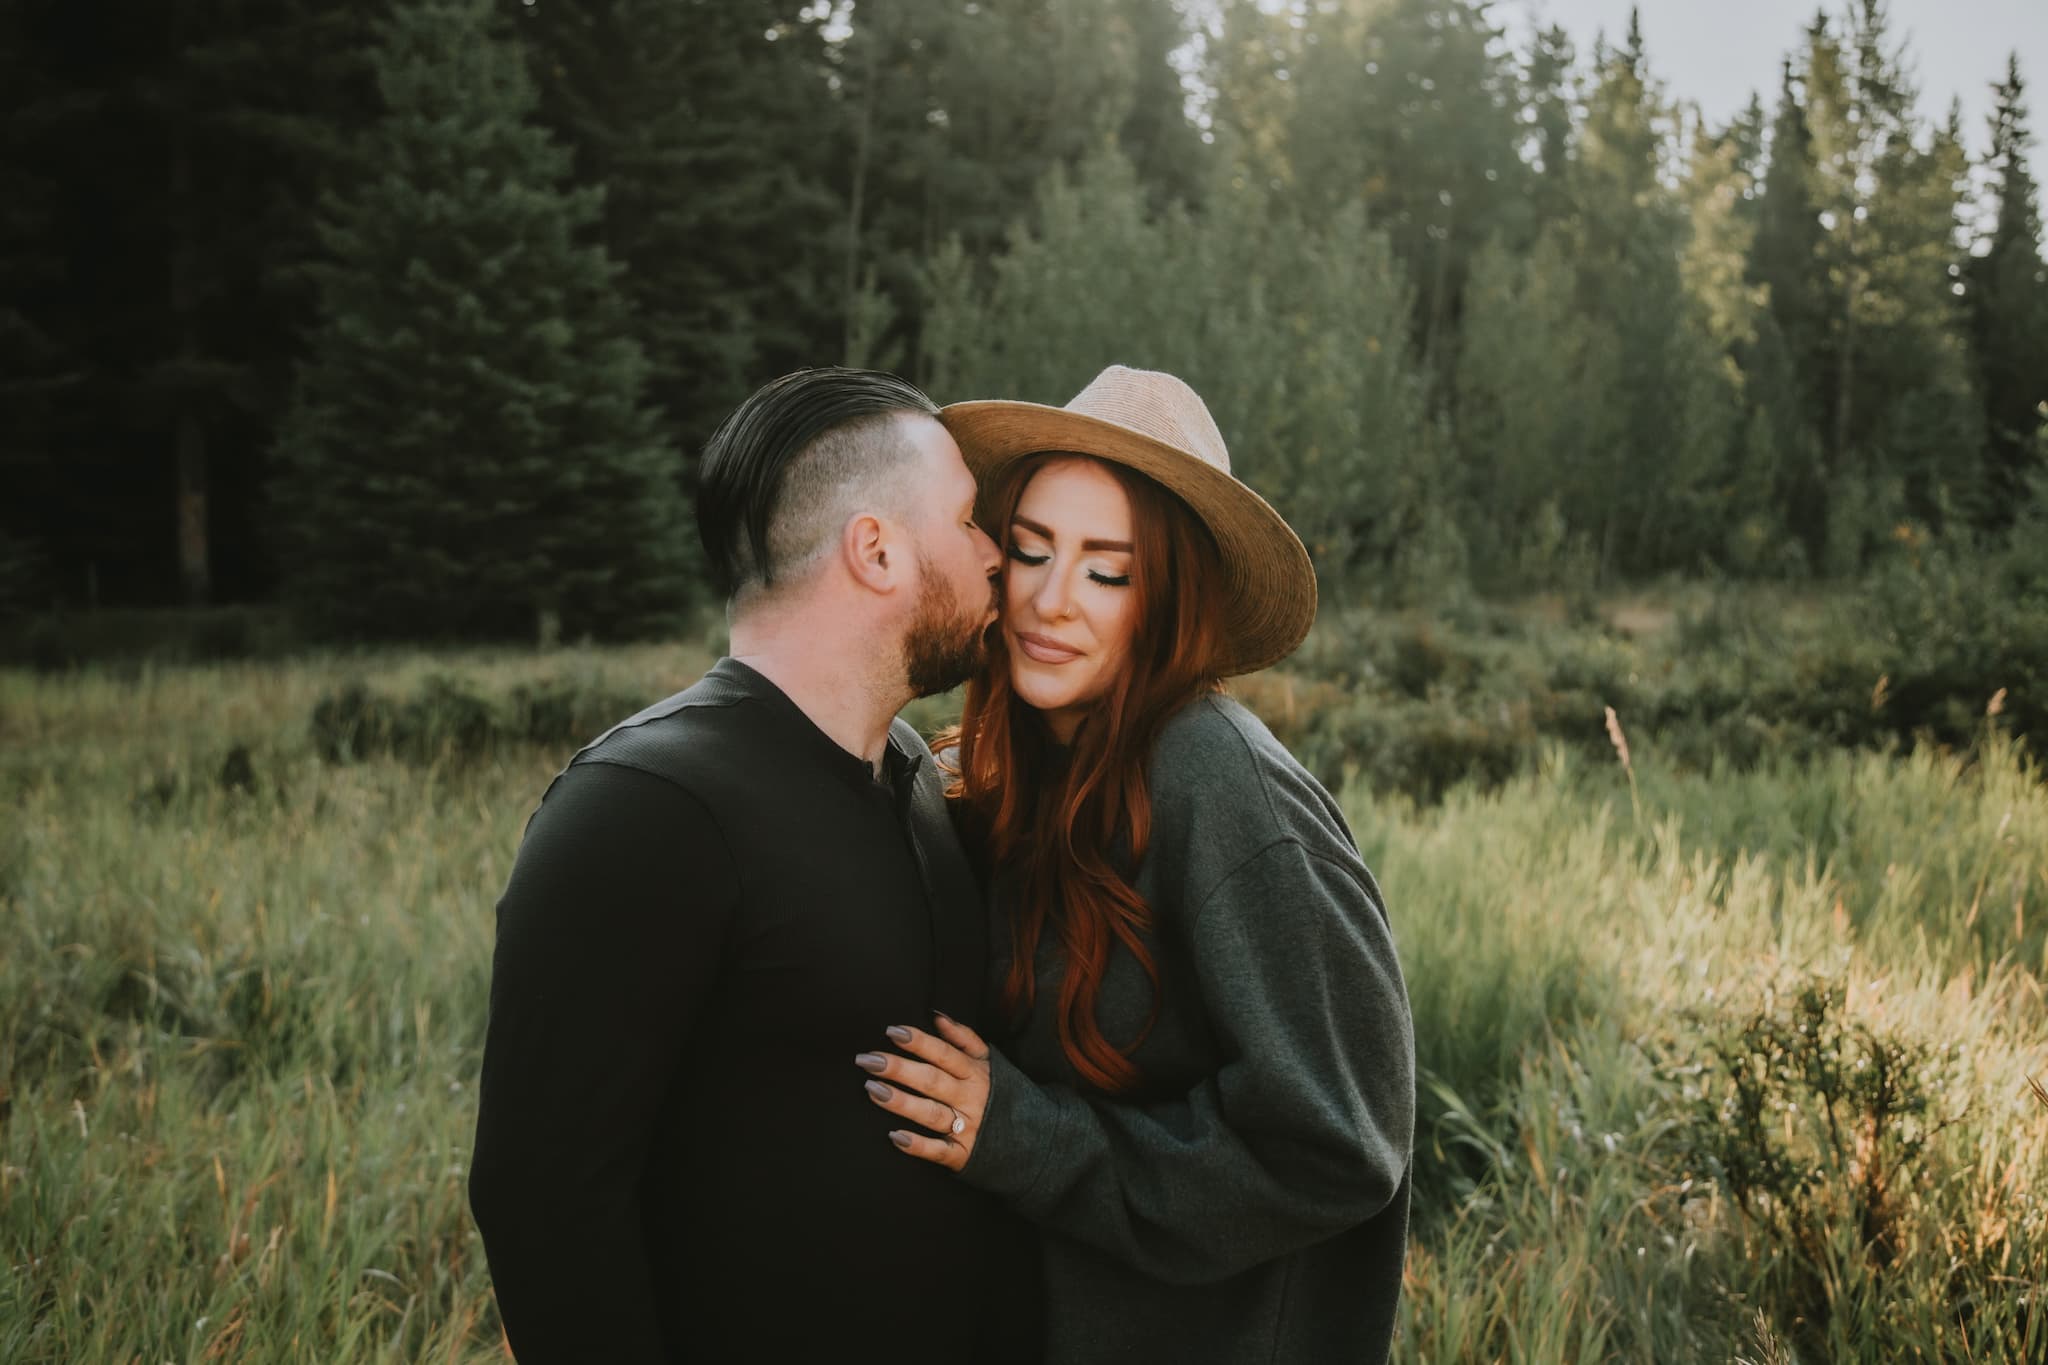 Why You Should Do an Engagement Session